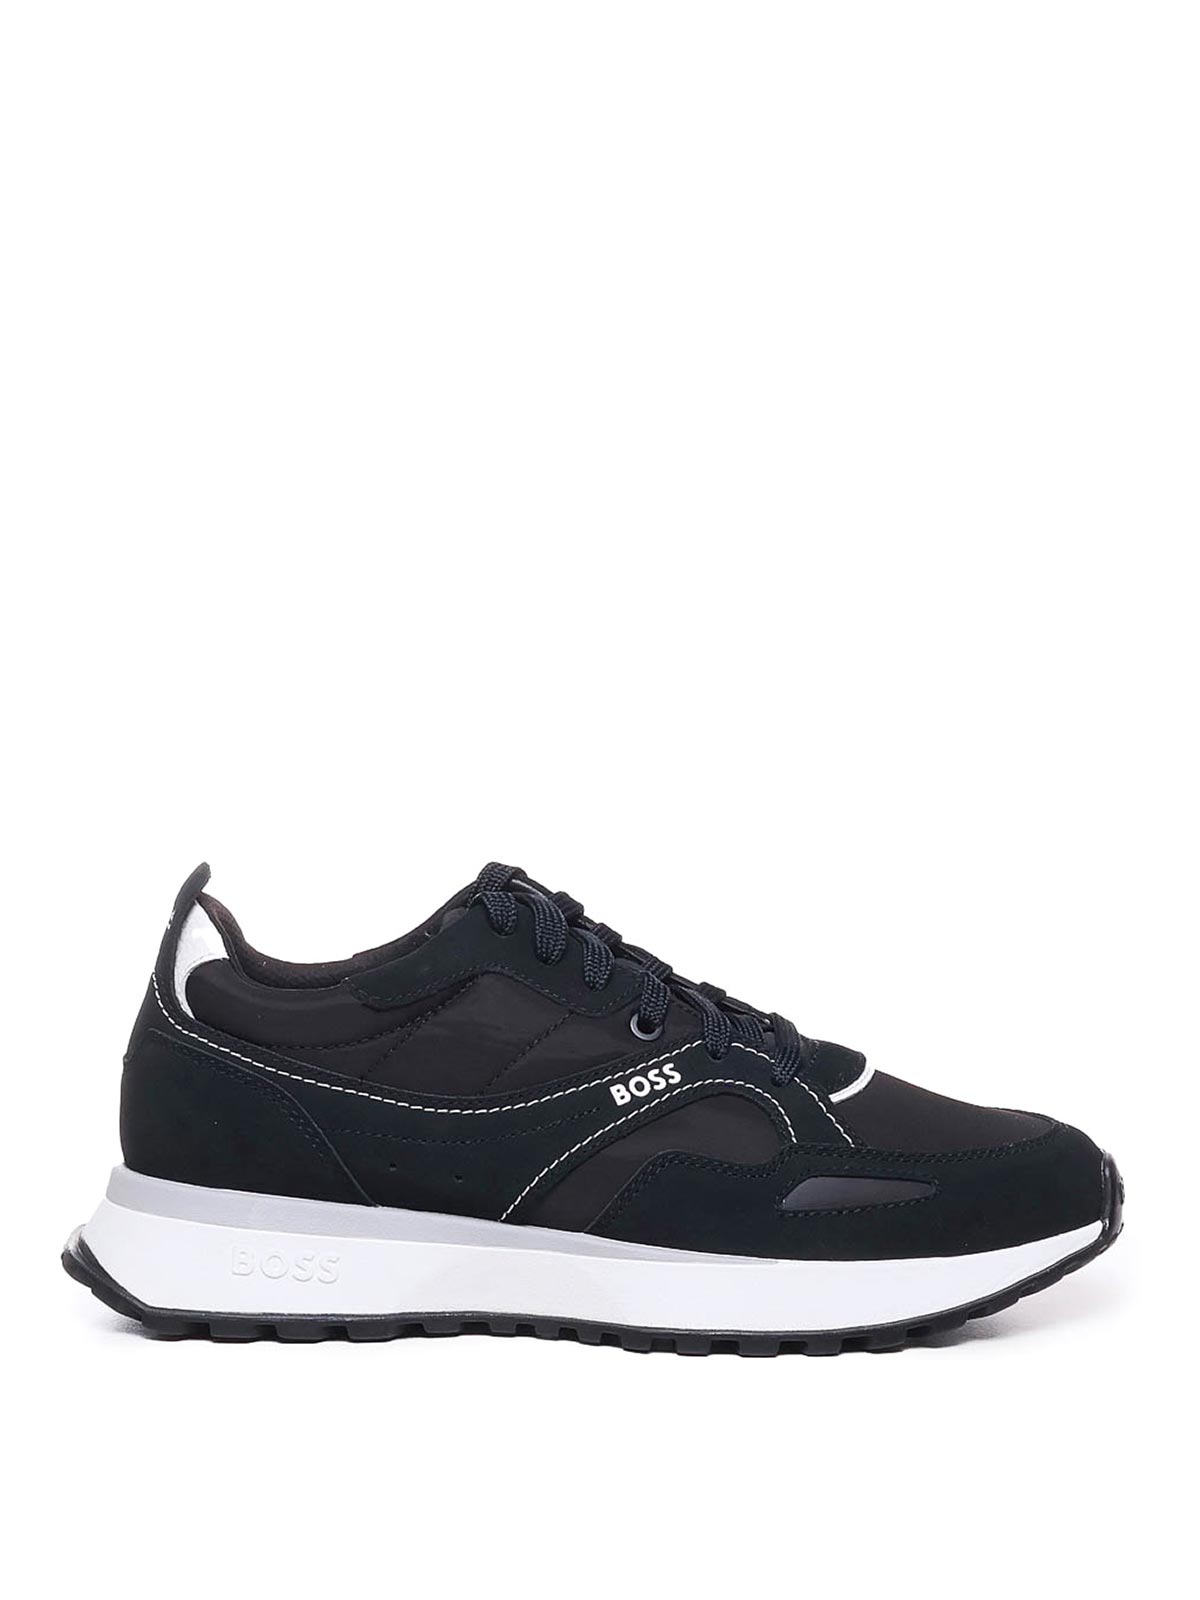 Hugo Boss Leather Sneakers With Logo In Black